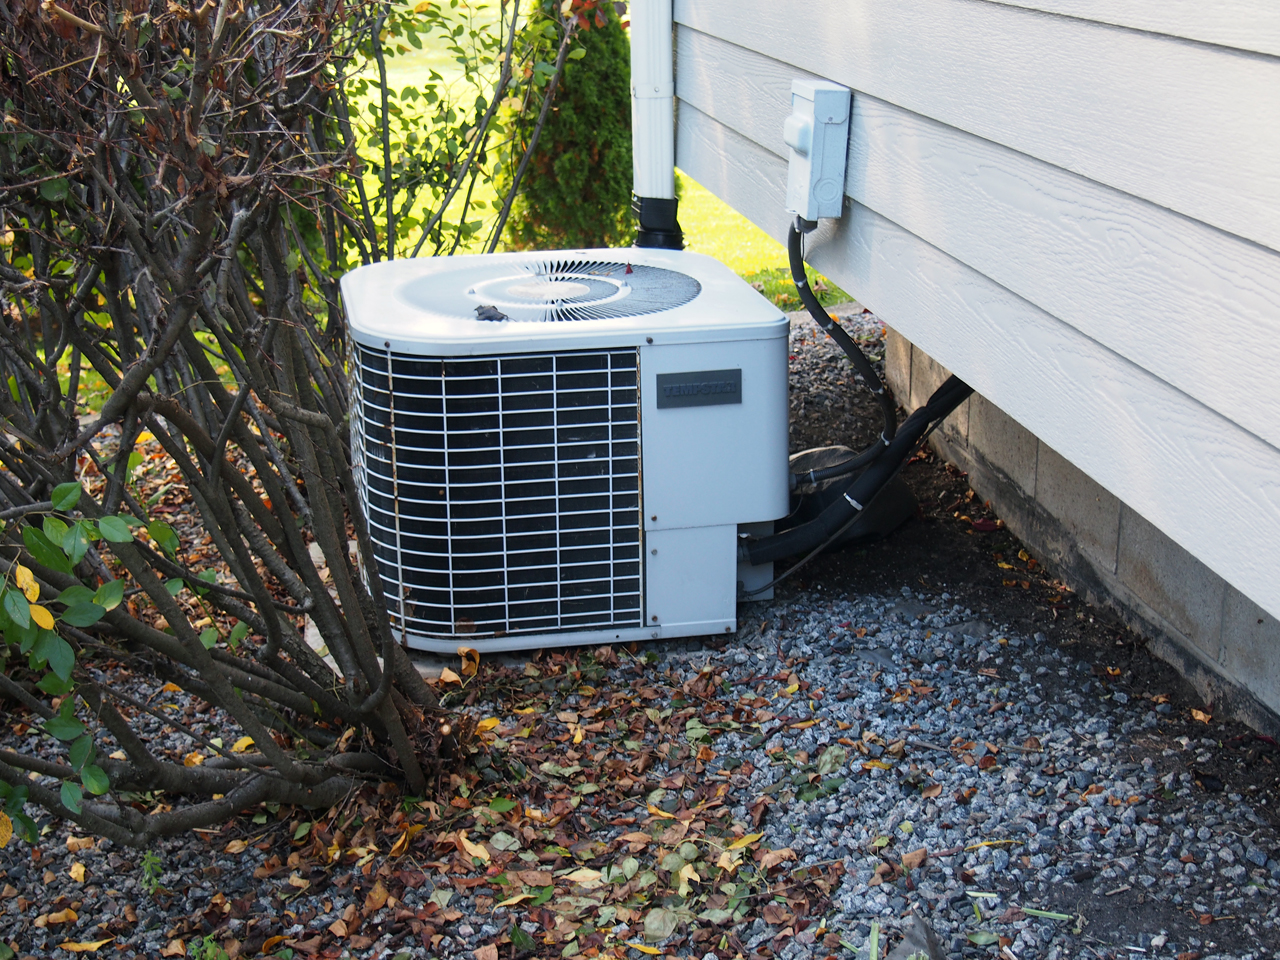 Original Tempstar AC Unit Installed When The House Was Built